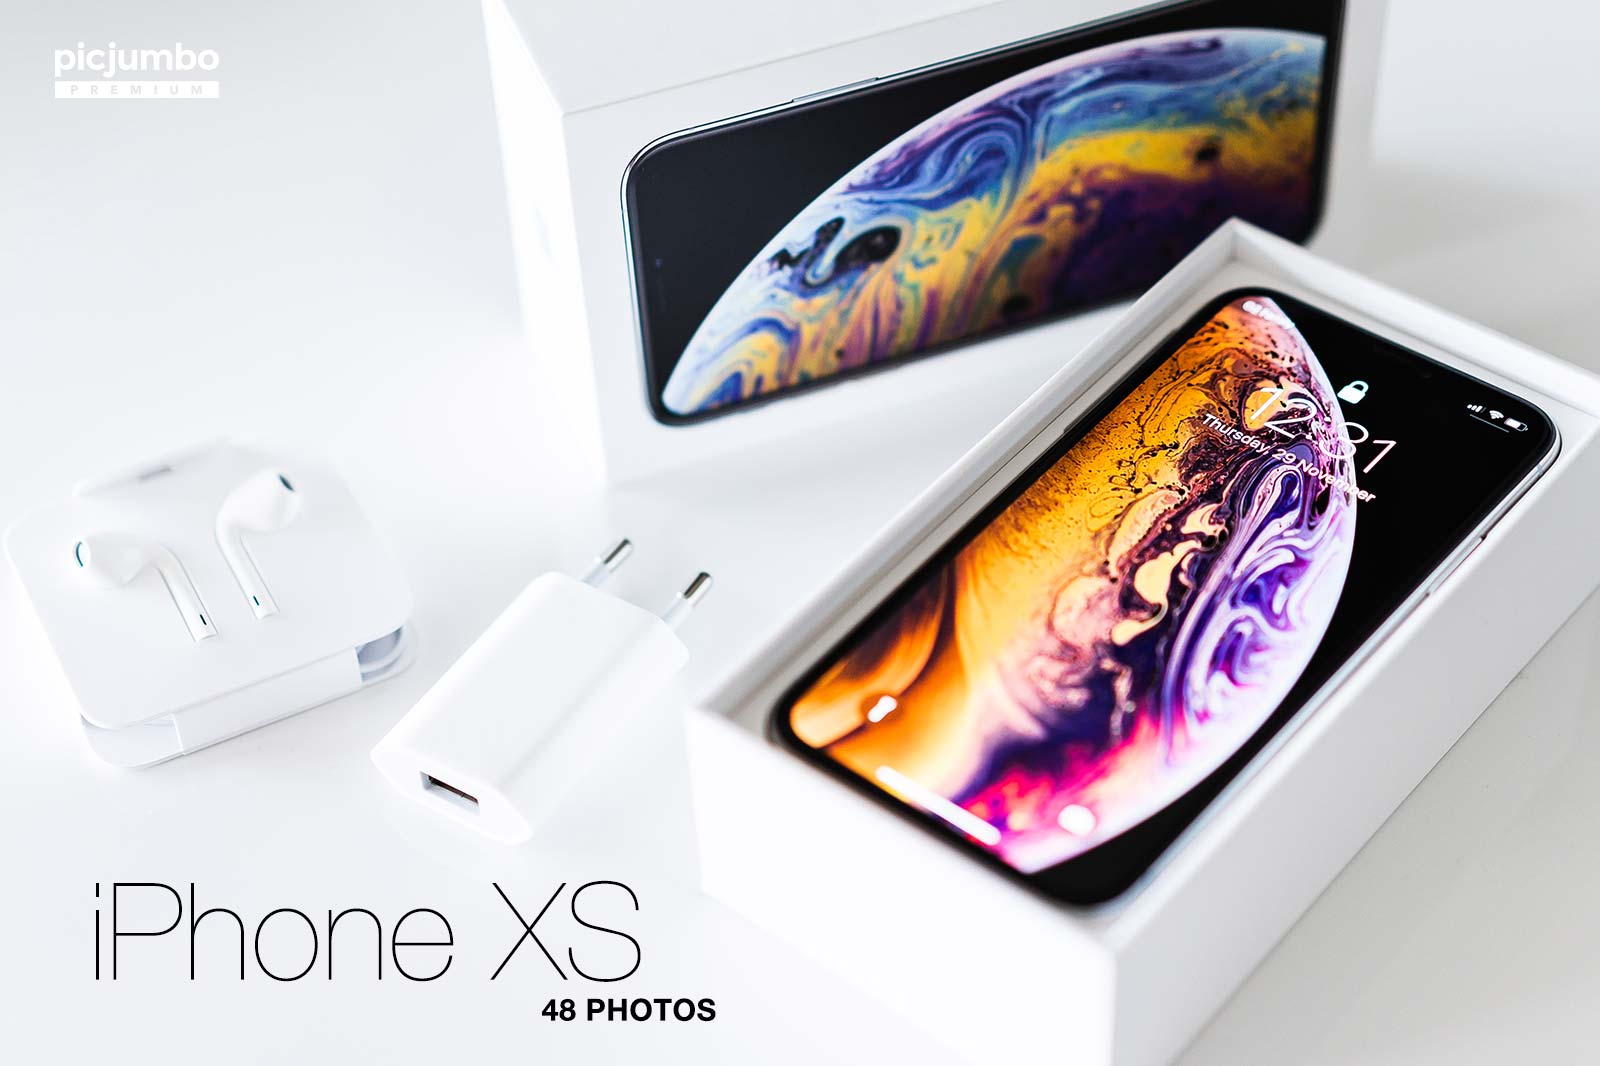 Download hi-res stock photos from our iPhone XS PREMIUM Collection!